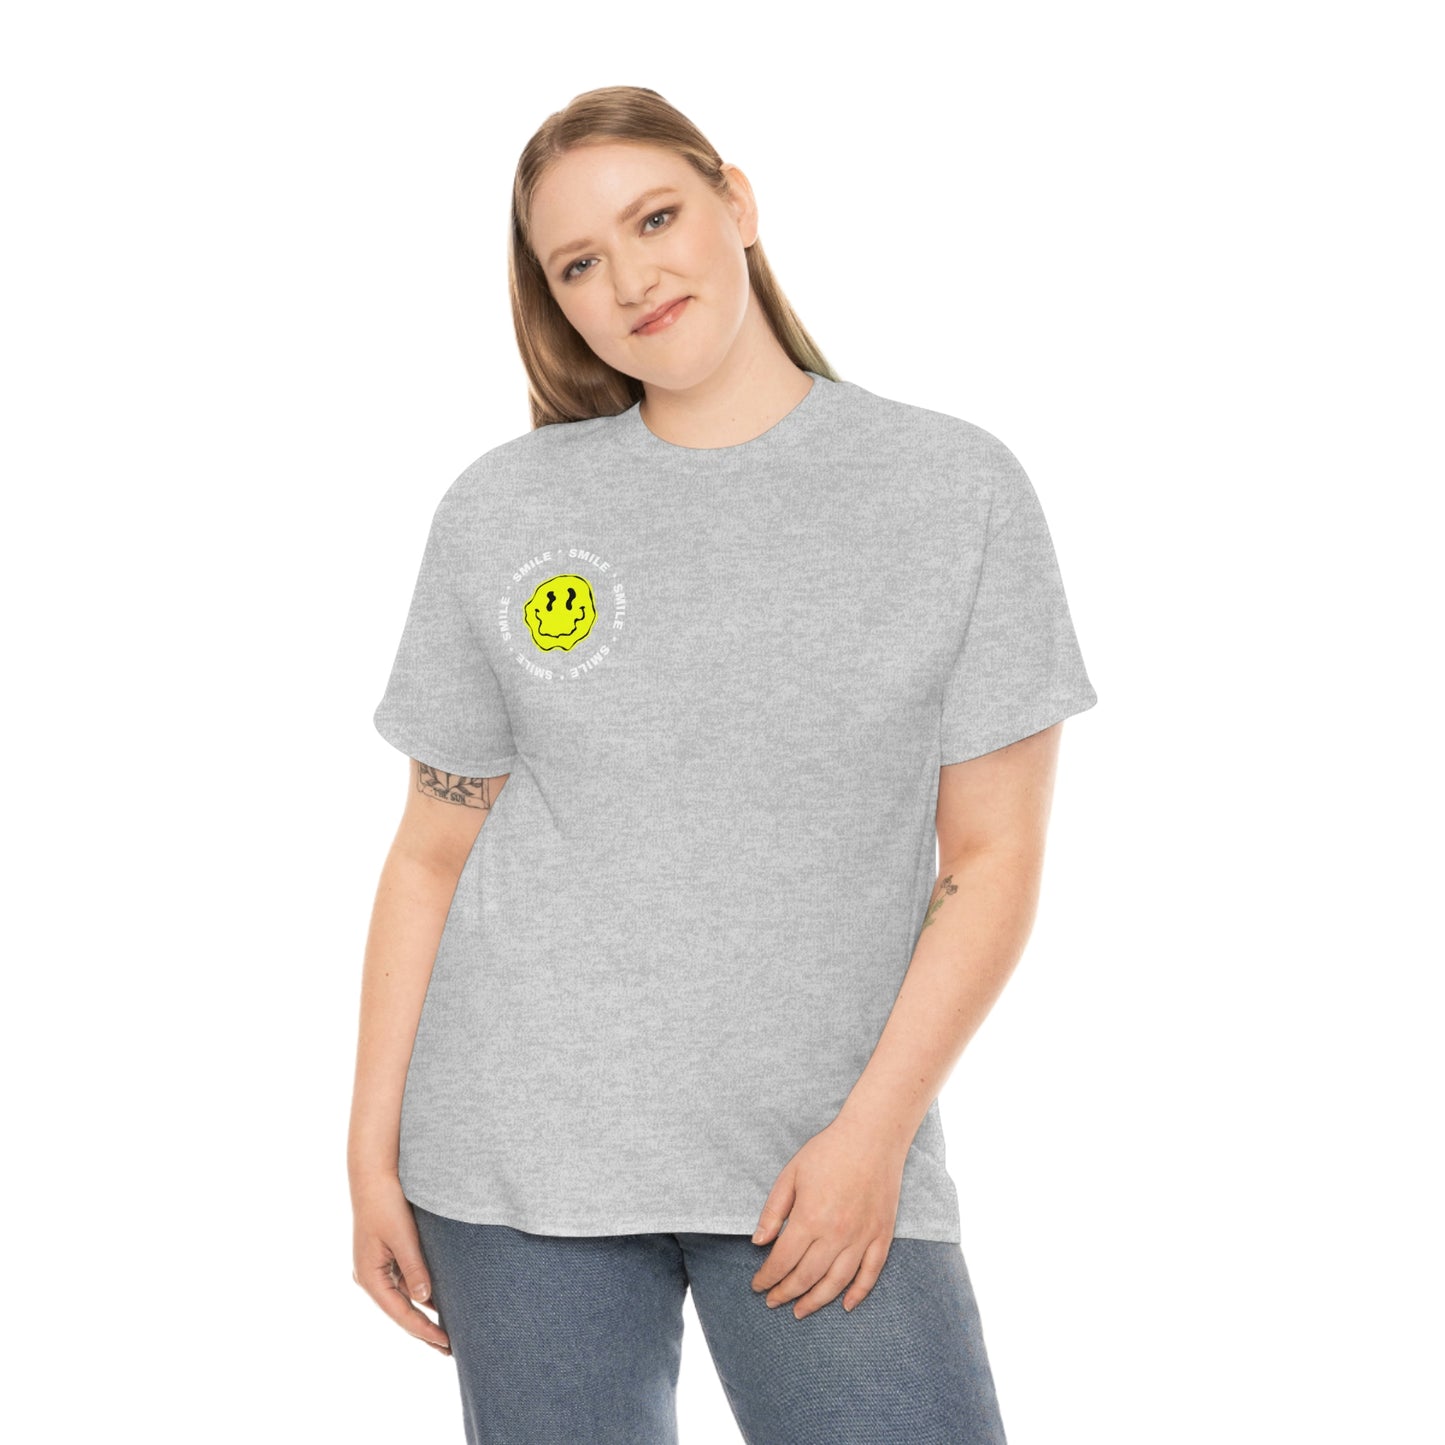 The King Smile T-Shirt